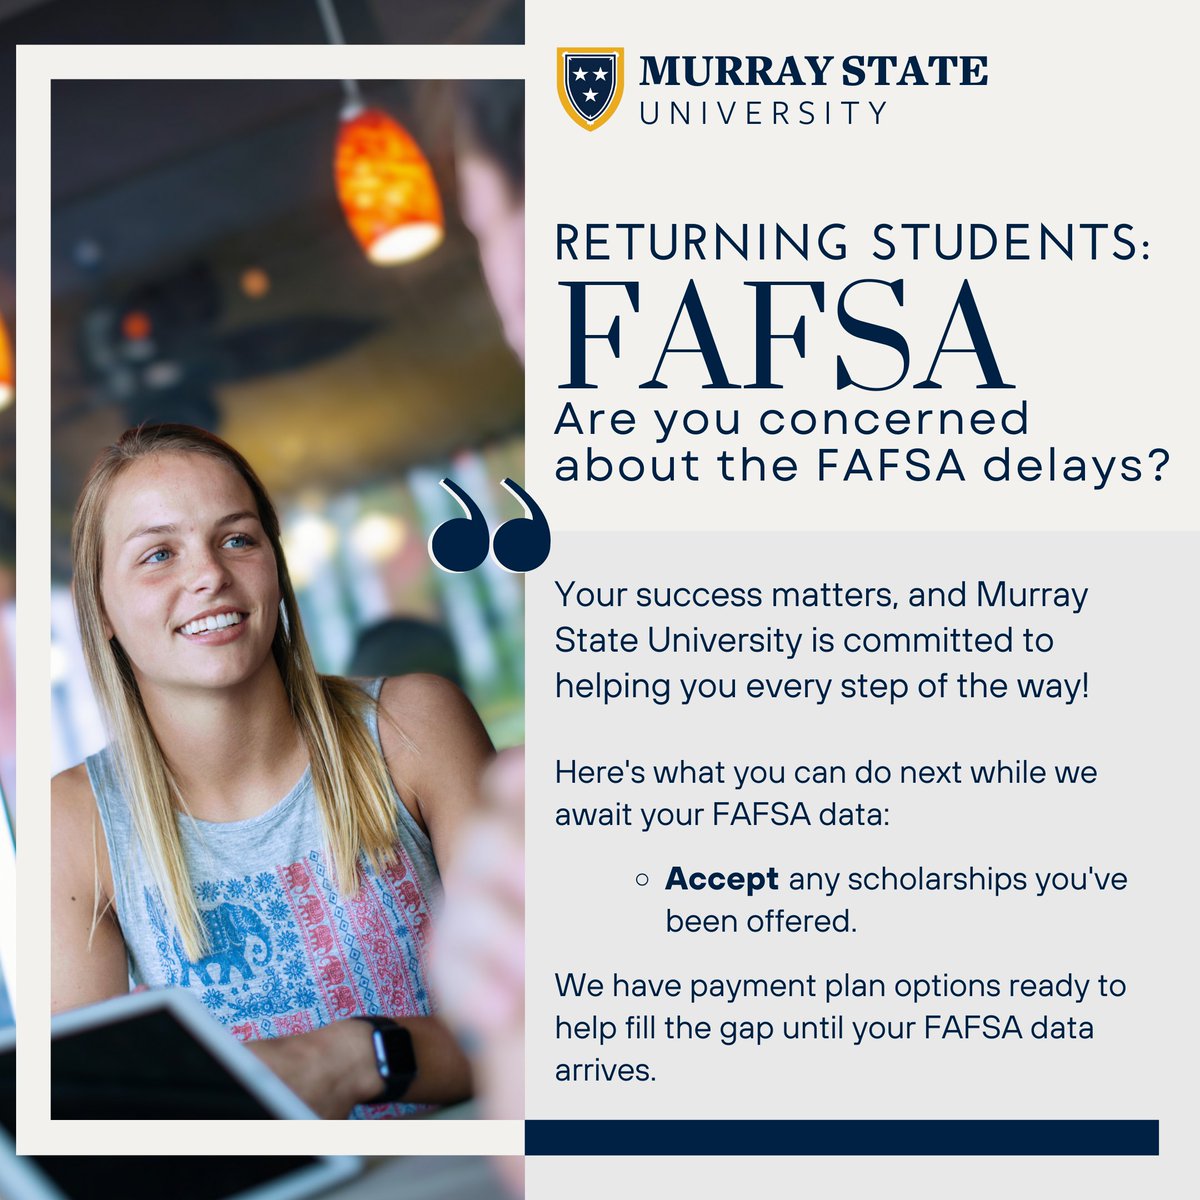 Attention returning students! Concerned about FAFSA delays? We're here to support you every step of the way. Here's what you can do next: ✅ Accept any scholarships you've been offered. We have payment plan options available to assist you until your FAFSA data arrives.